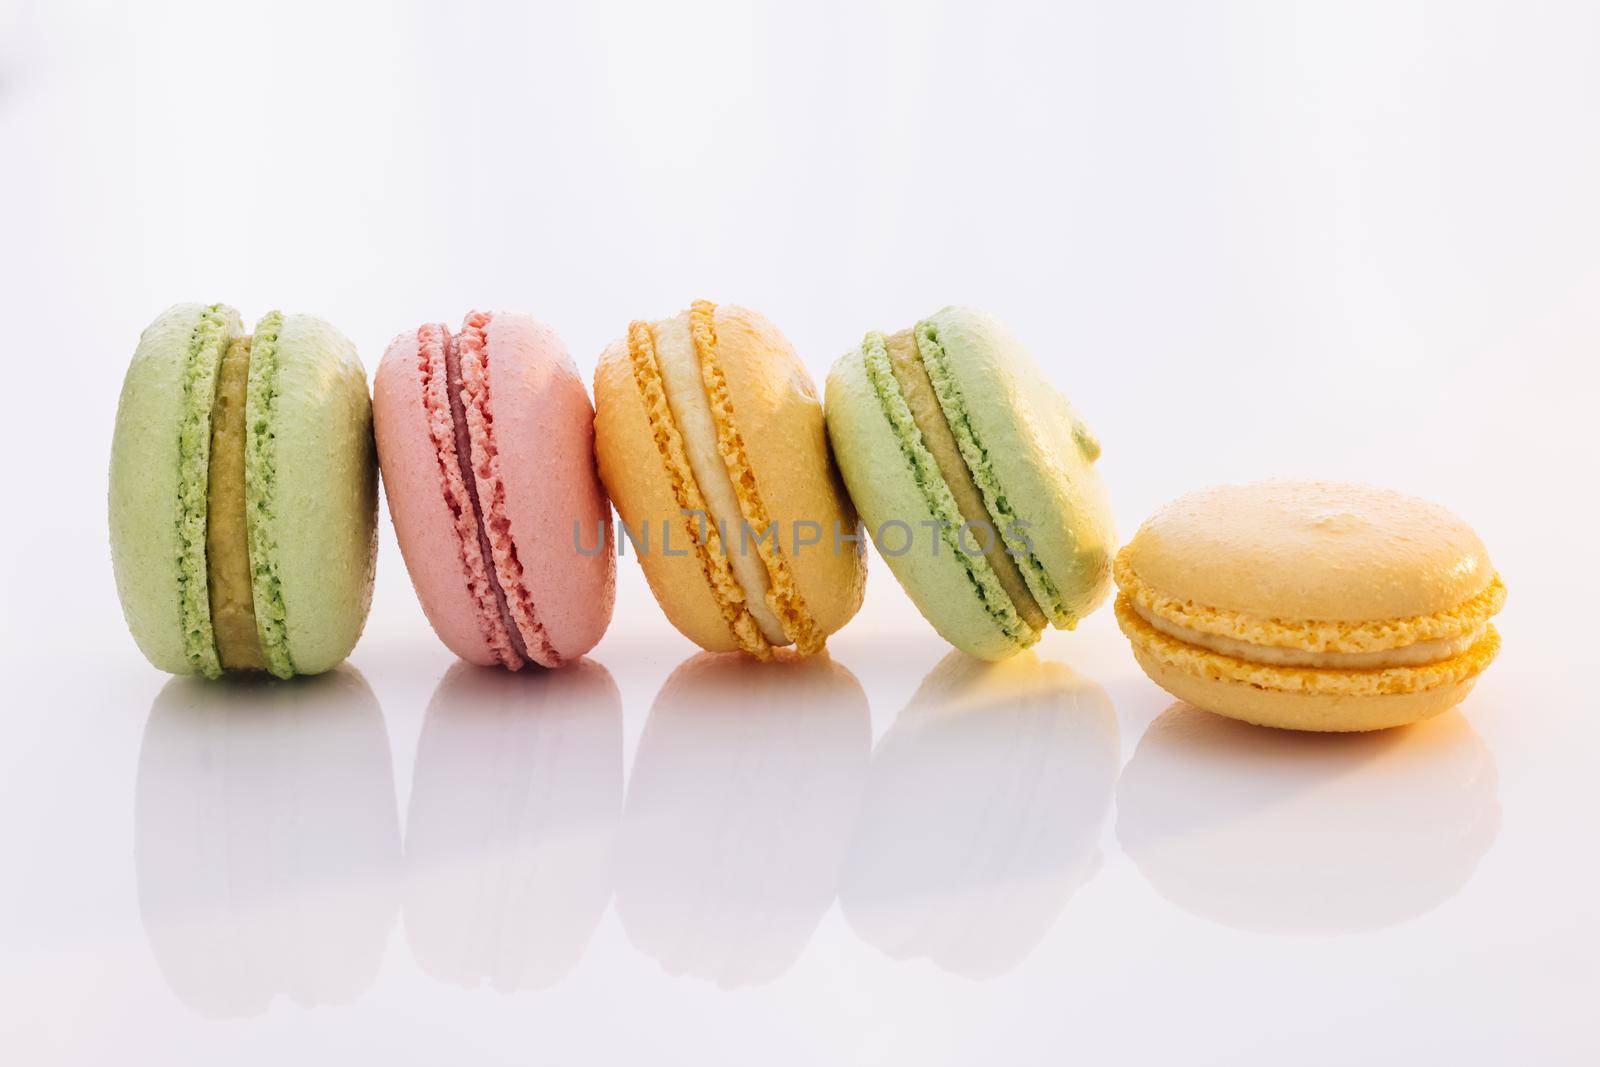 French macarons on white background. Different colorful macaroon. Tasty sweet color macaron. Colorful macarons dessert by uflypro